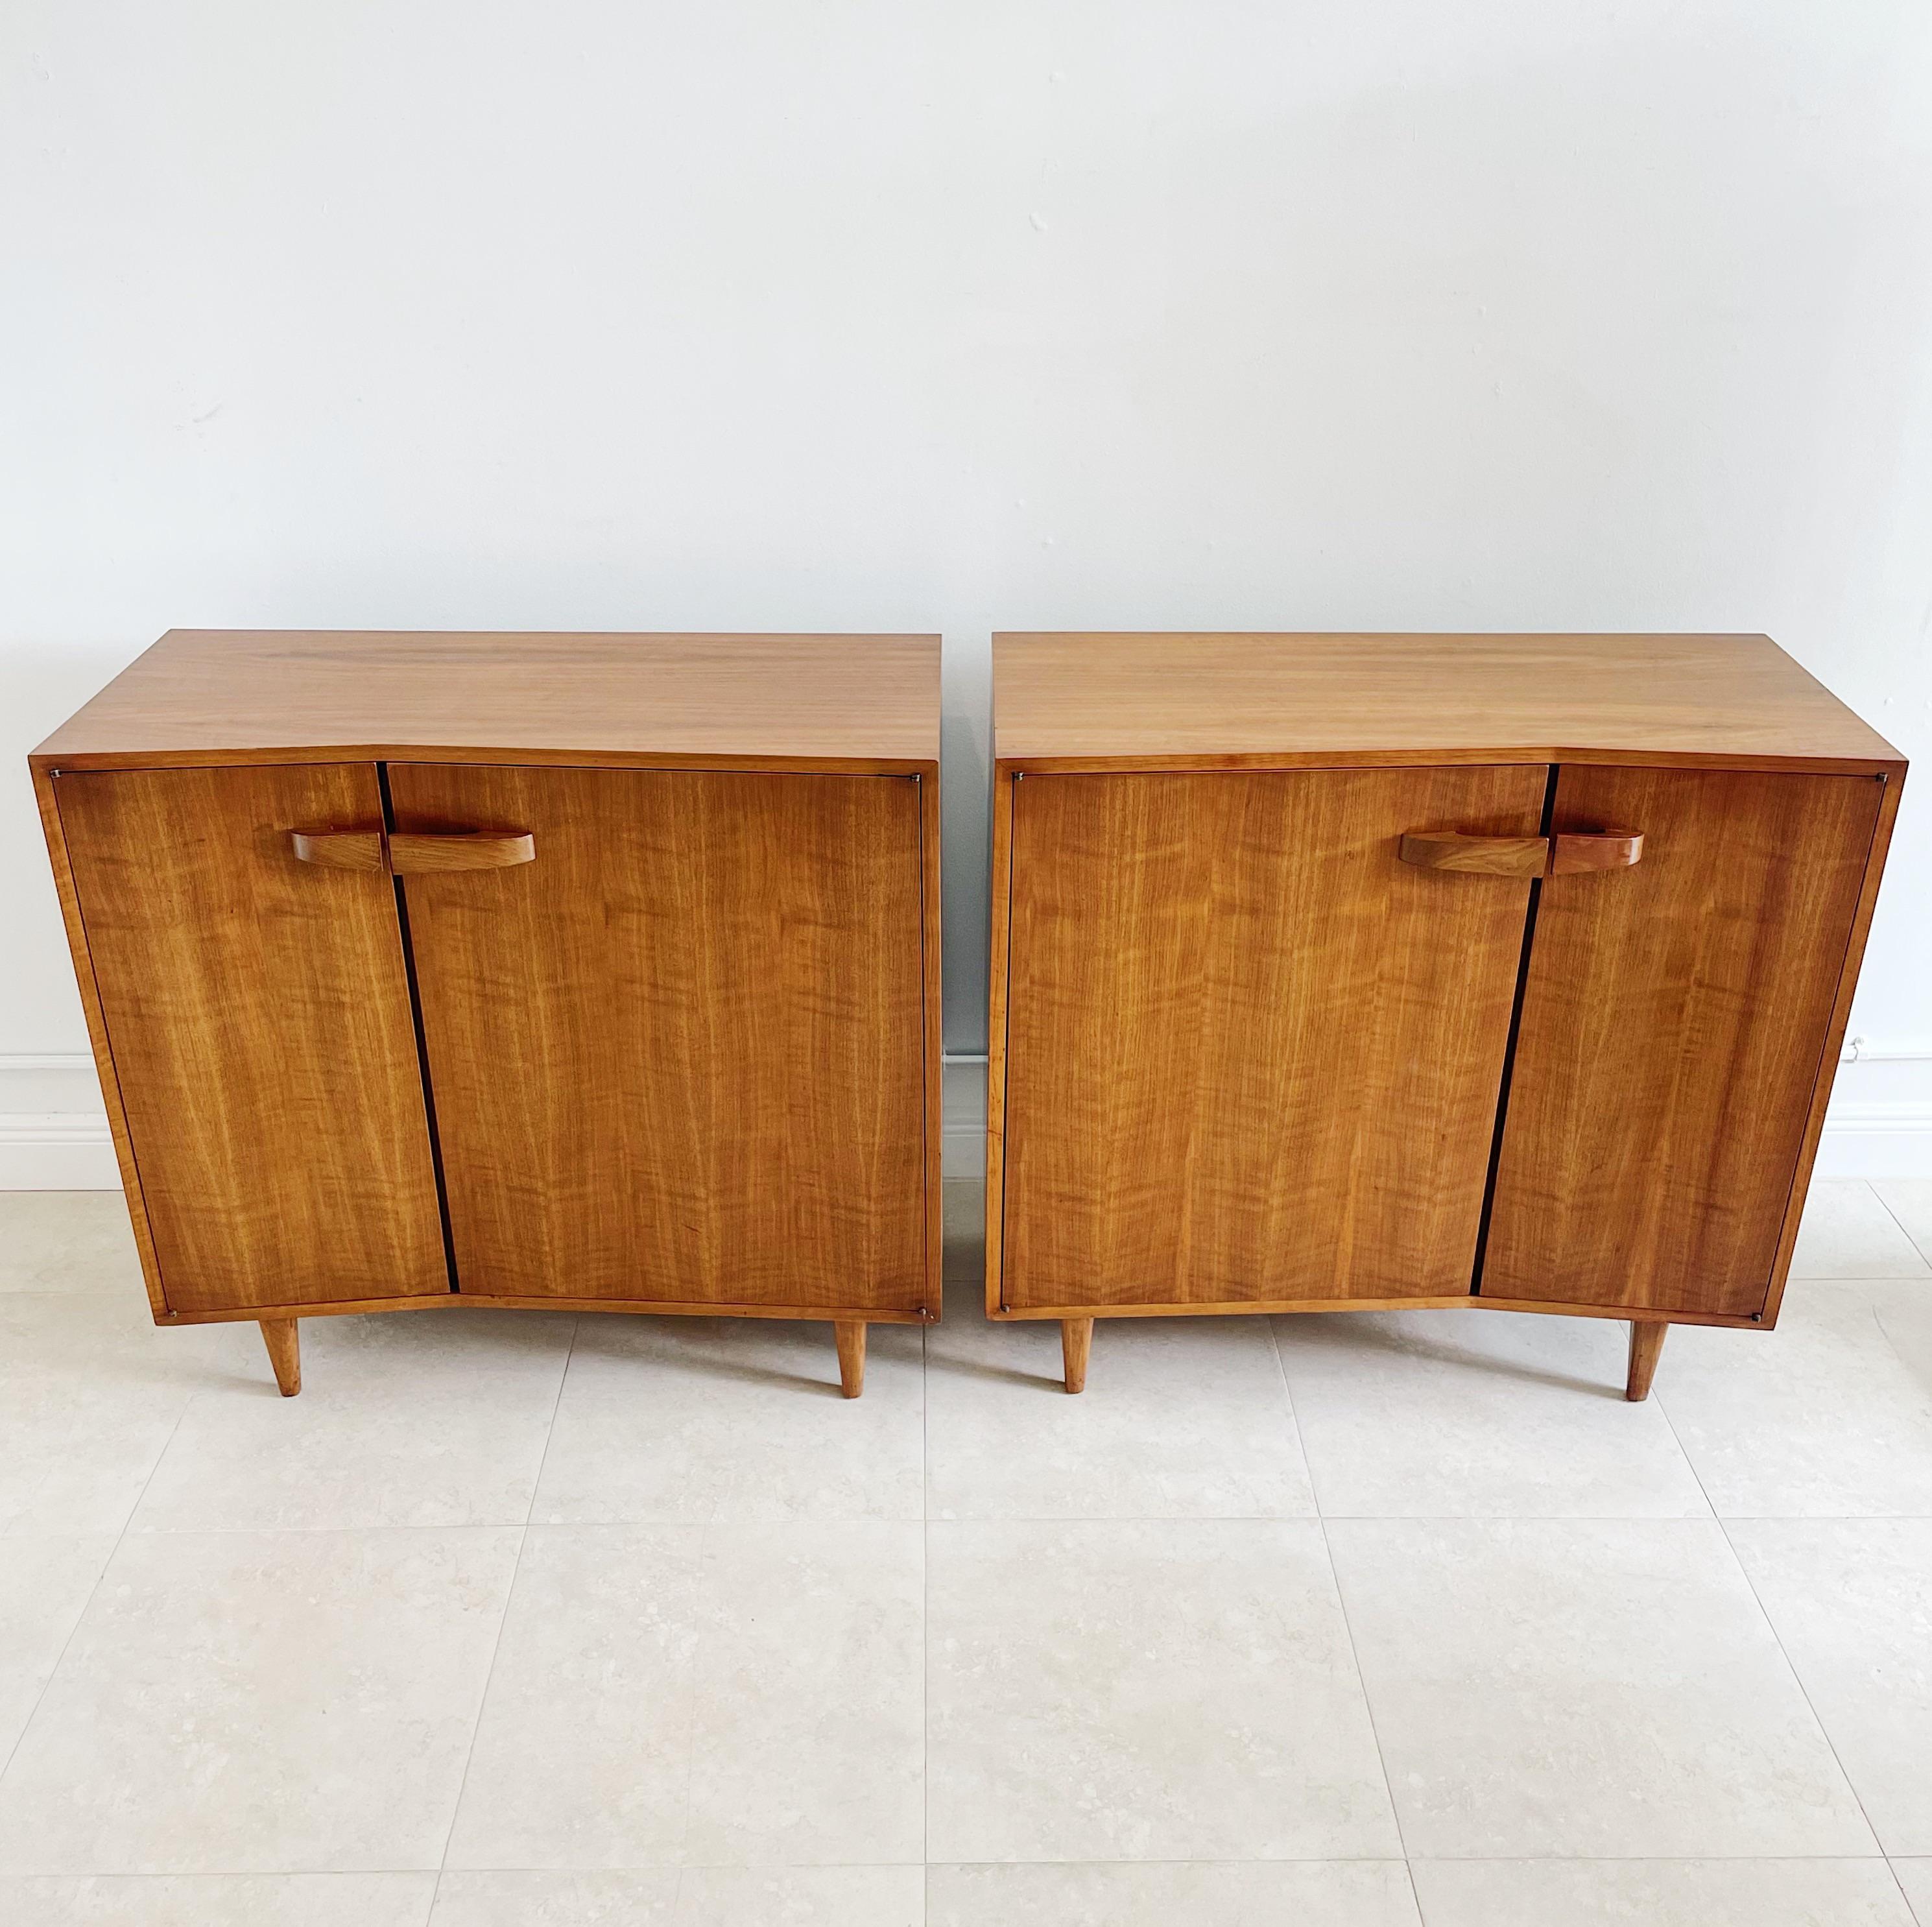 Rare pair of opposing Bertha Schaefer for Singer and Sons slant front, walnut chest of drawers cabinets. Each cabinet featuring six drawers and shelving in the interior. Originally purchased from the Singer and Sons Furniture Gallery in New York